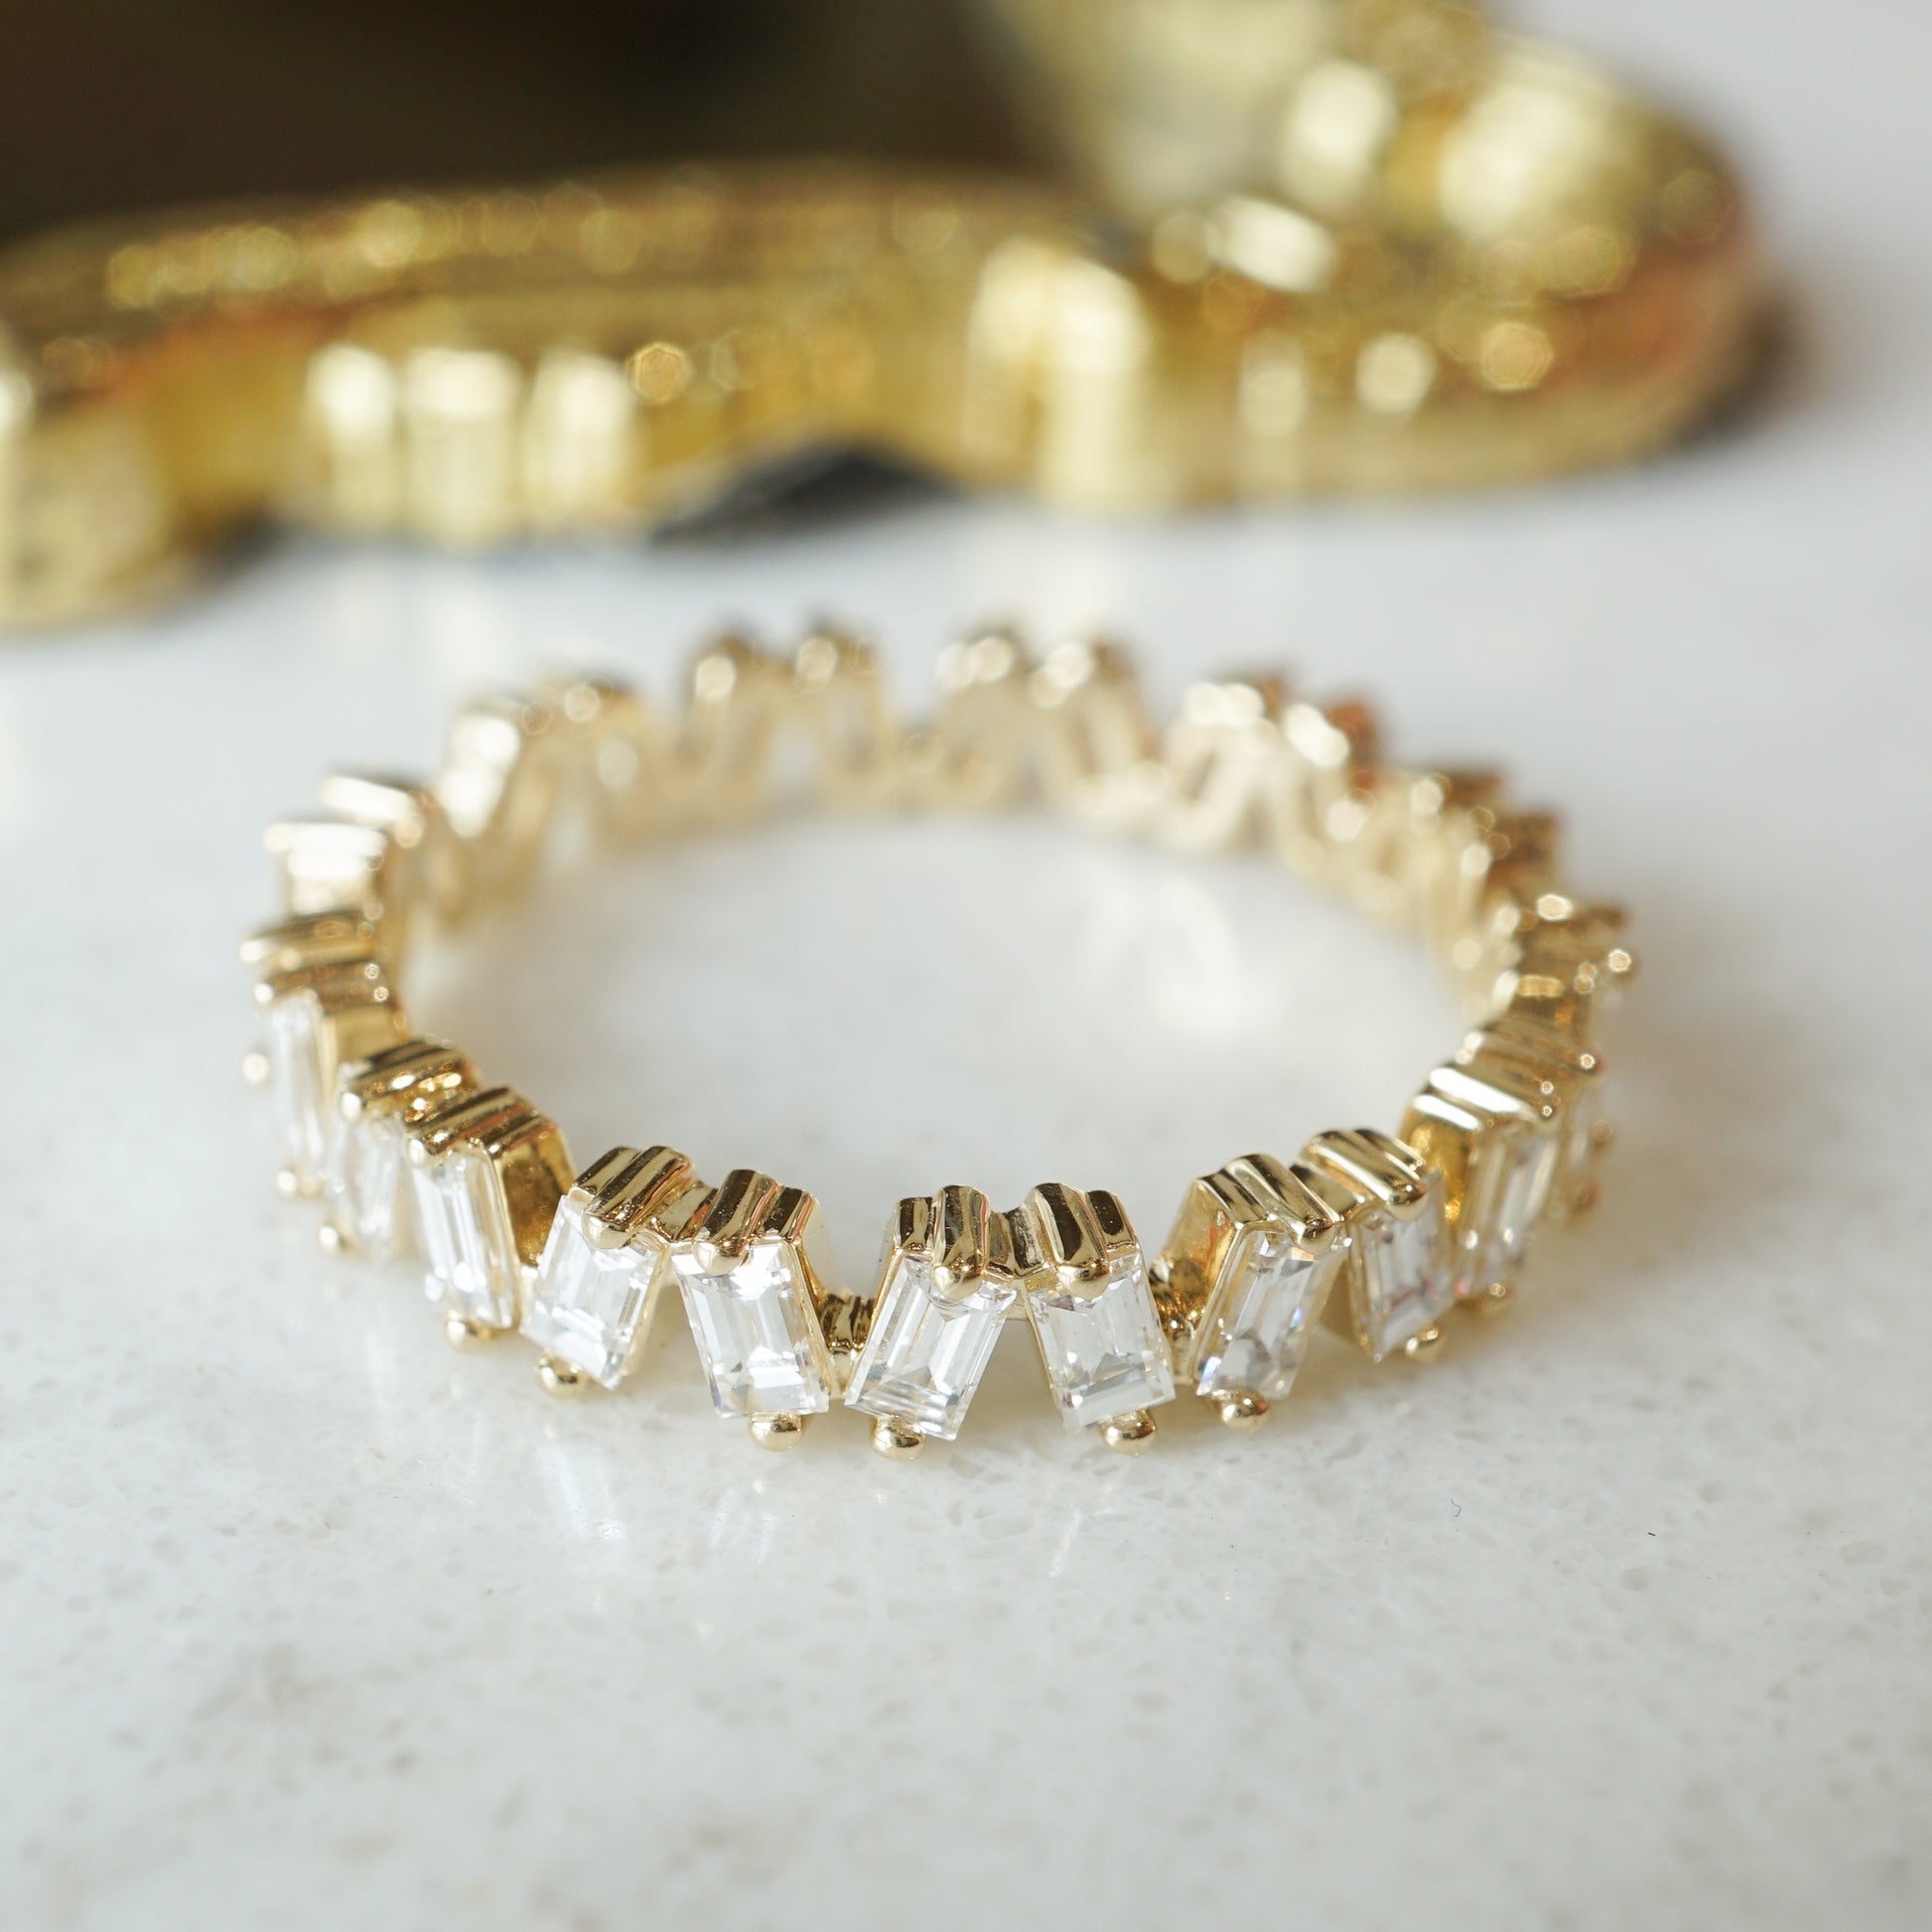 ***HOLD*** 1.30 Baguette Cut Diamond Eternity Wedding Band in 14k Yellow Gold